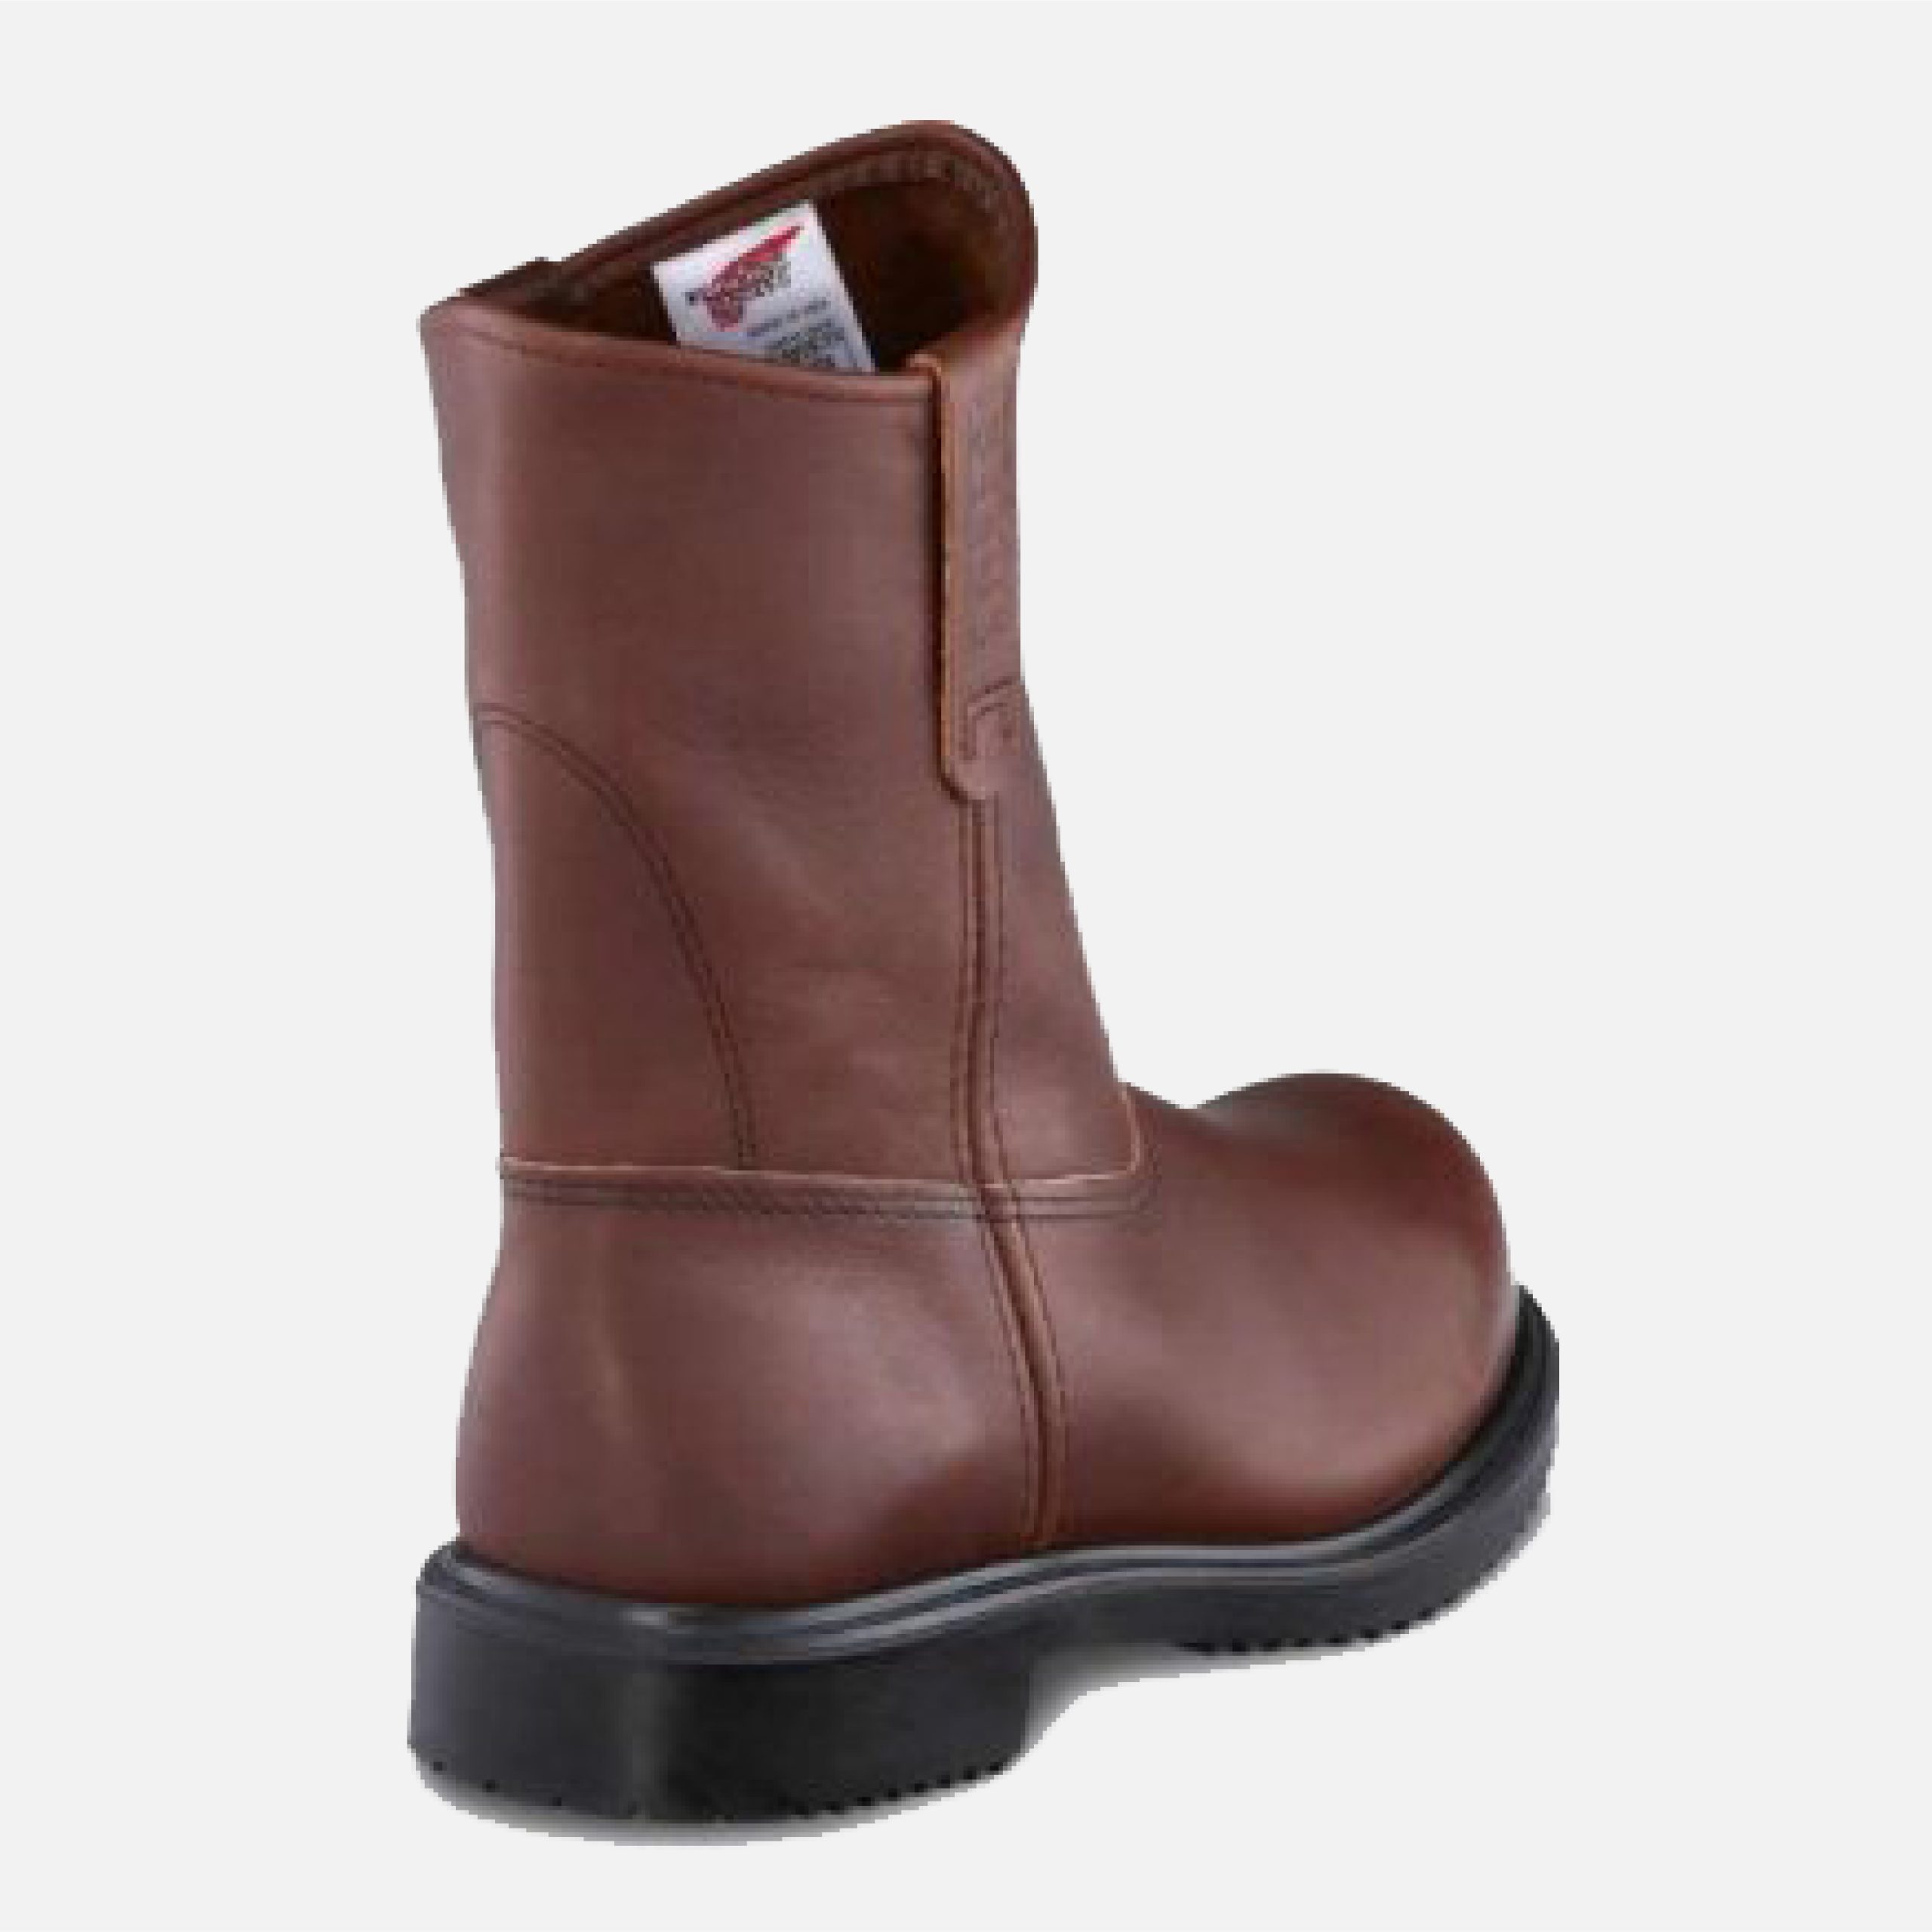 RED WING 8241 ST 9 PULL ON SAFETY BOOTS - The Leeden Store